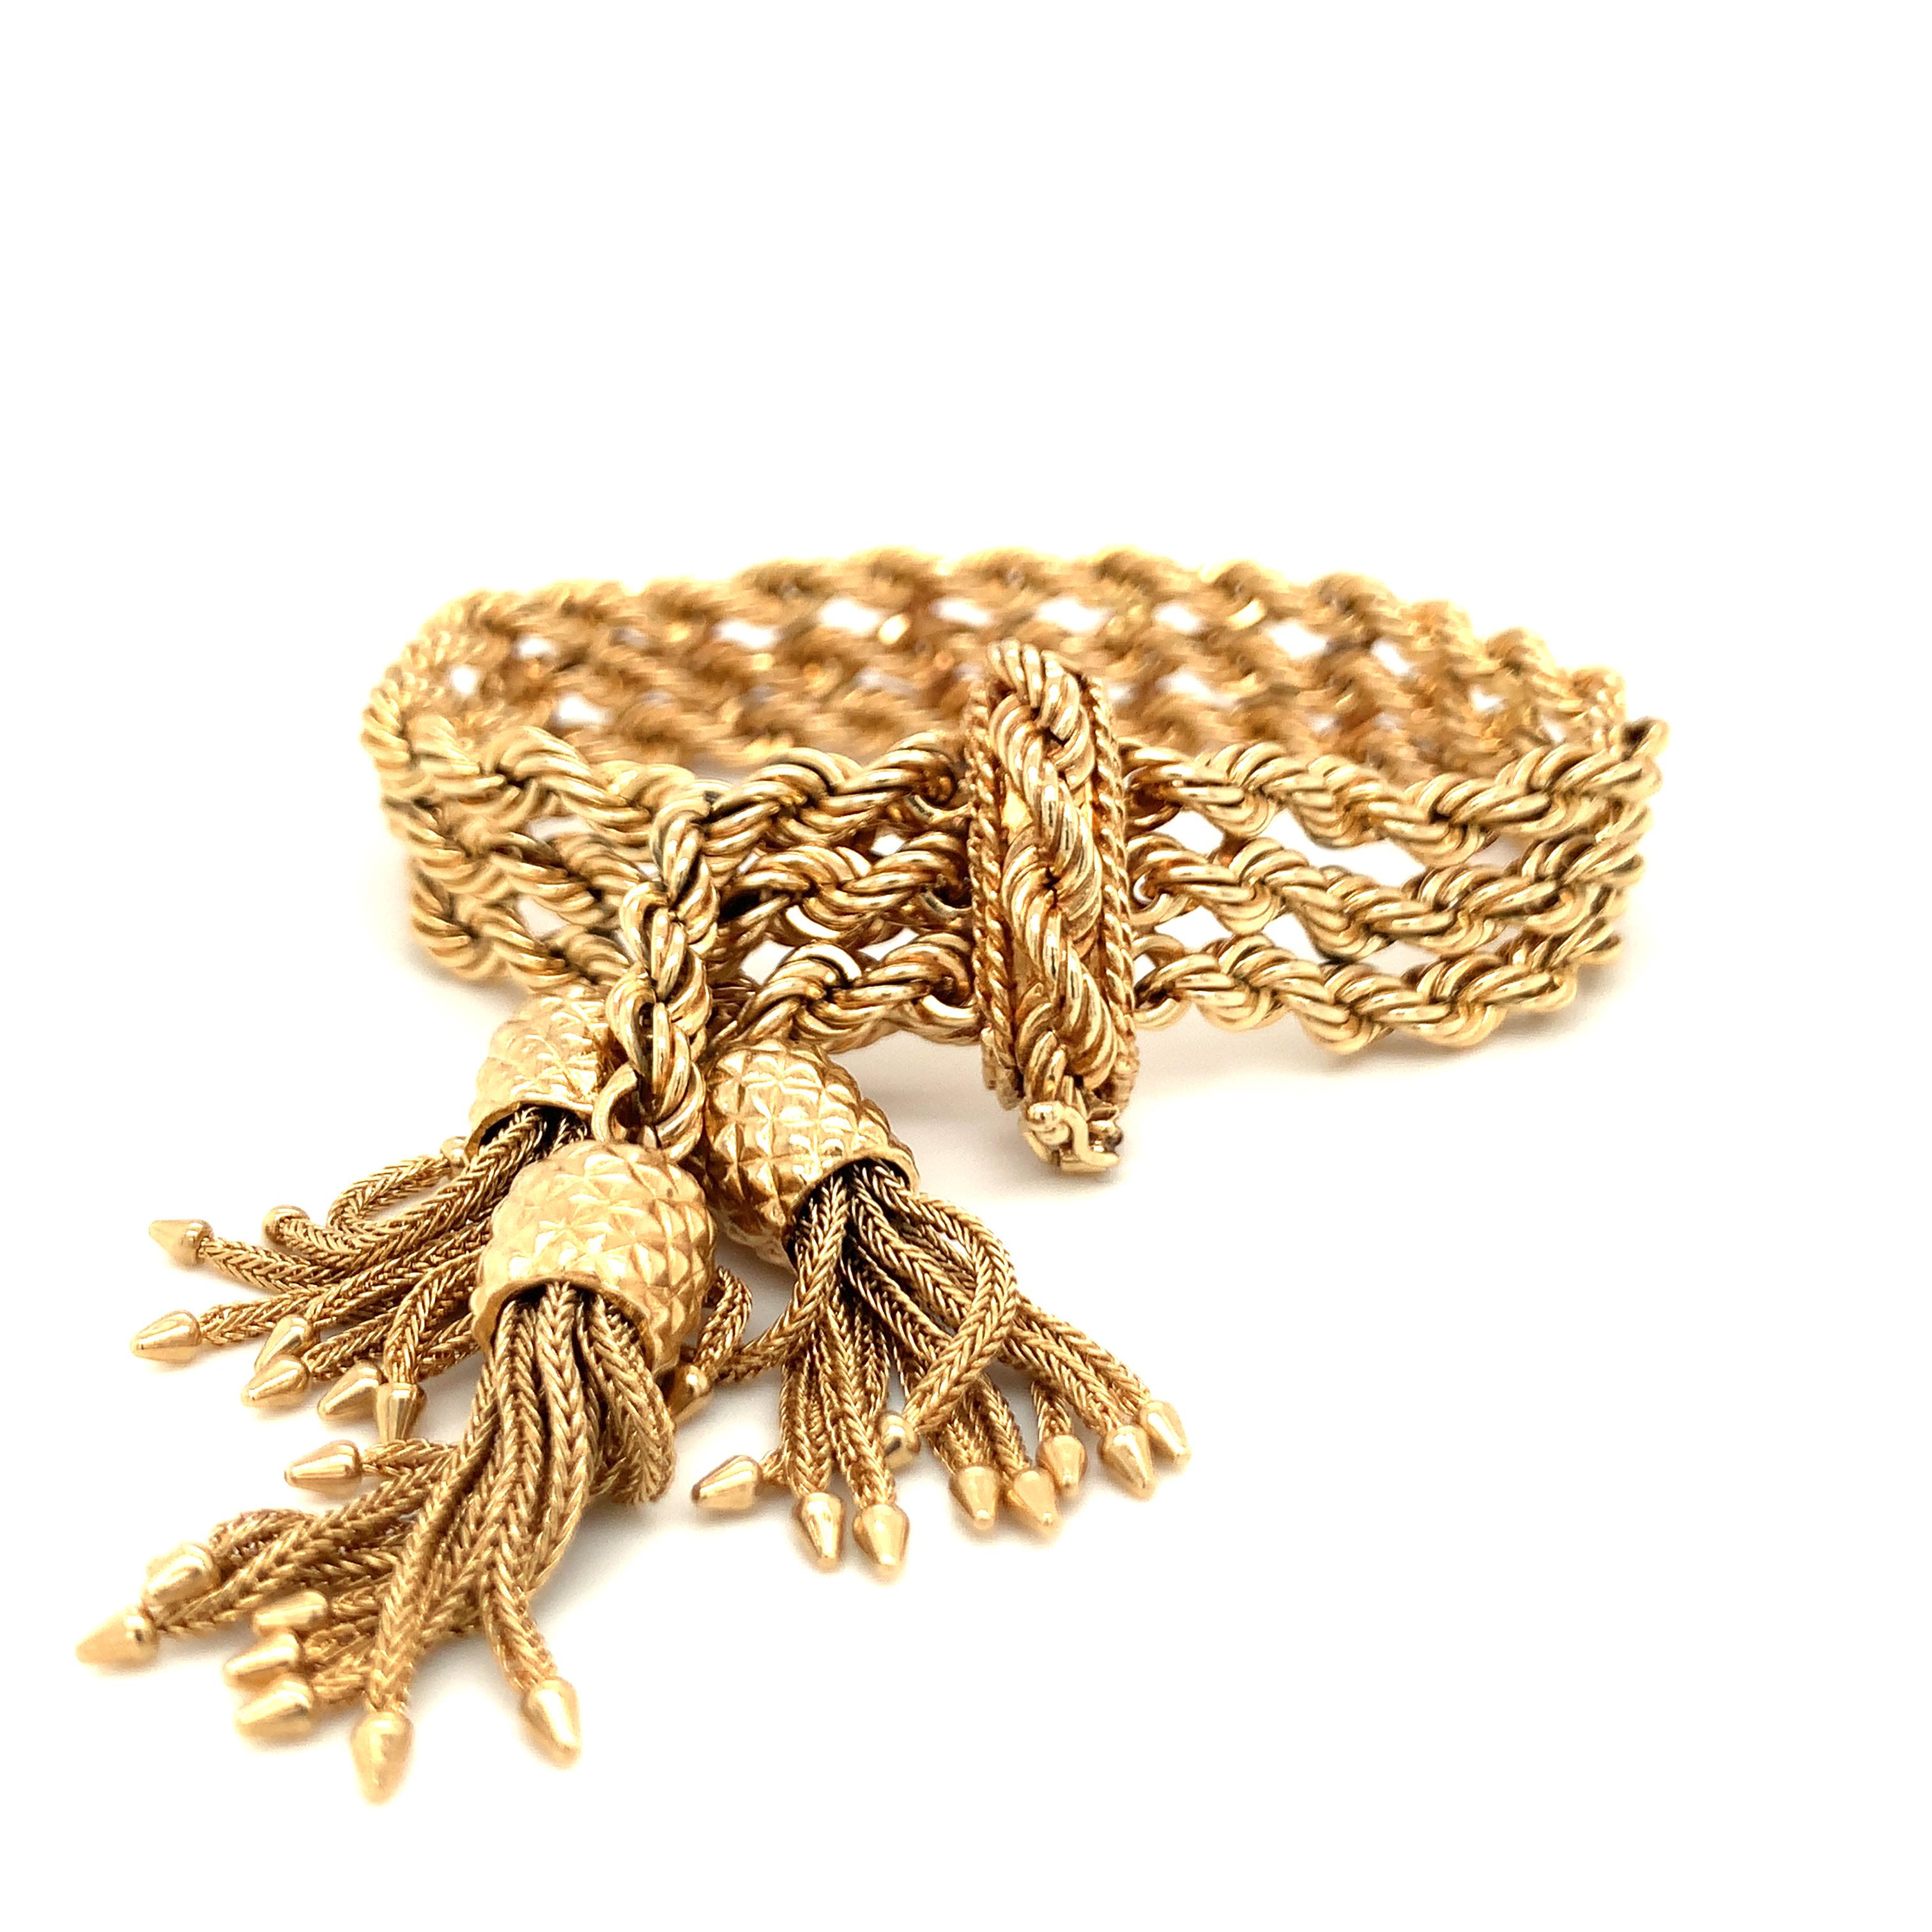 One 14K yellow gold bracelet composed of 3 rope twist chain links with 3 suspended tassle charms. 14k-yg bracelet composed of 3 rope twist chain links with 3 suspending tassle charms.

Intricate, playful, attractive.

Metal: 14k Yellow Gold
Circa: